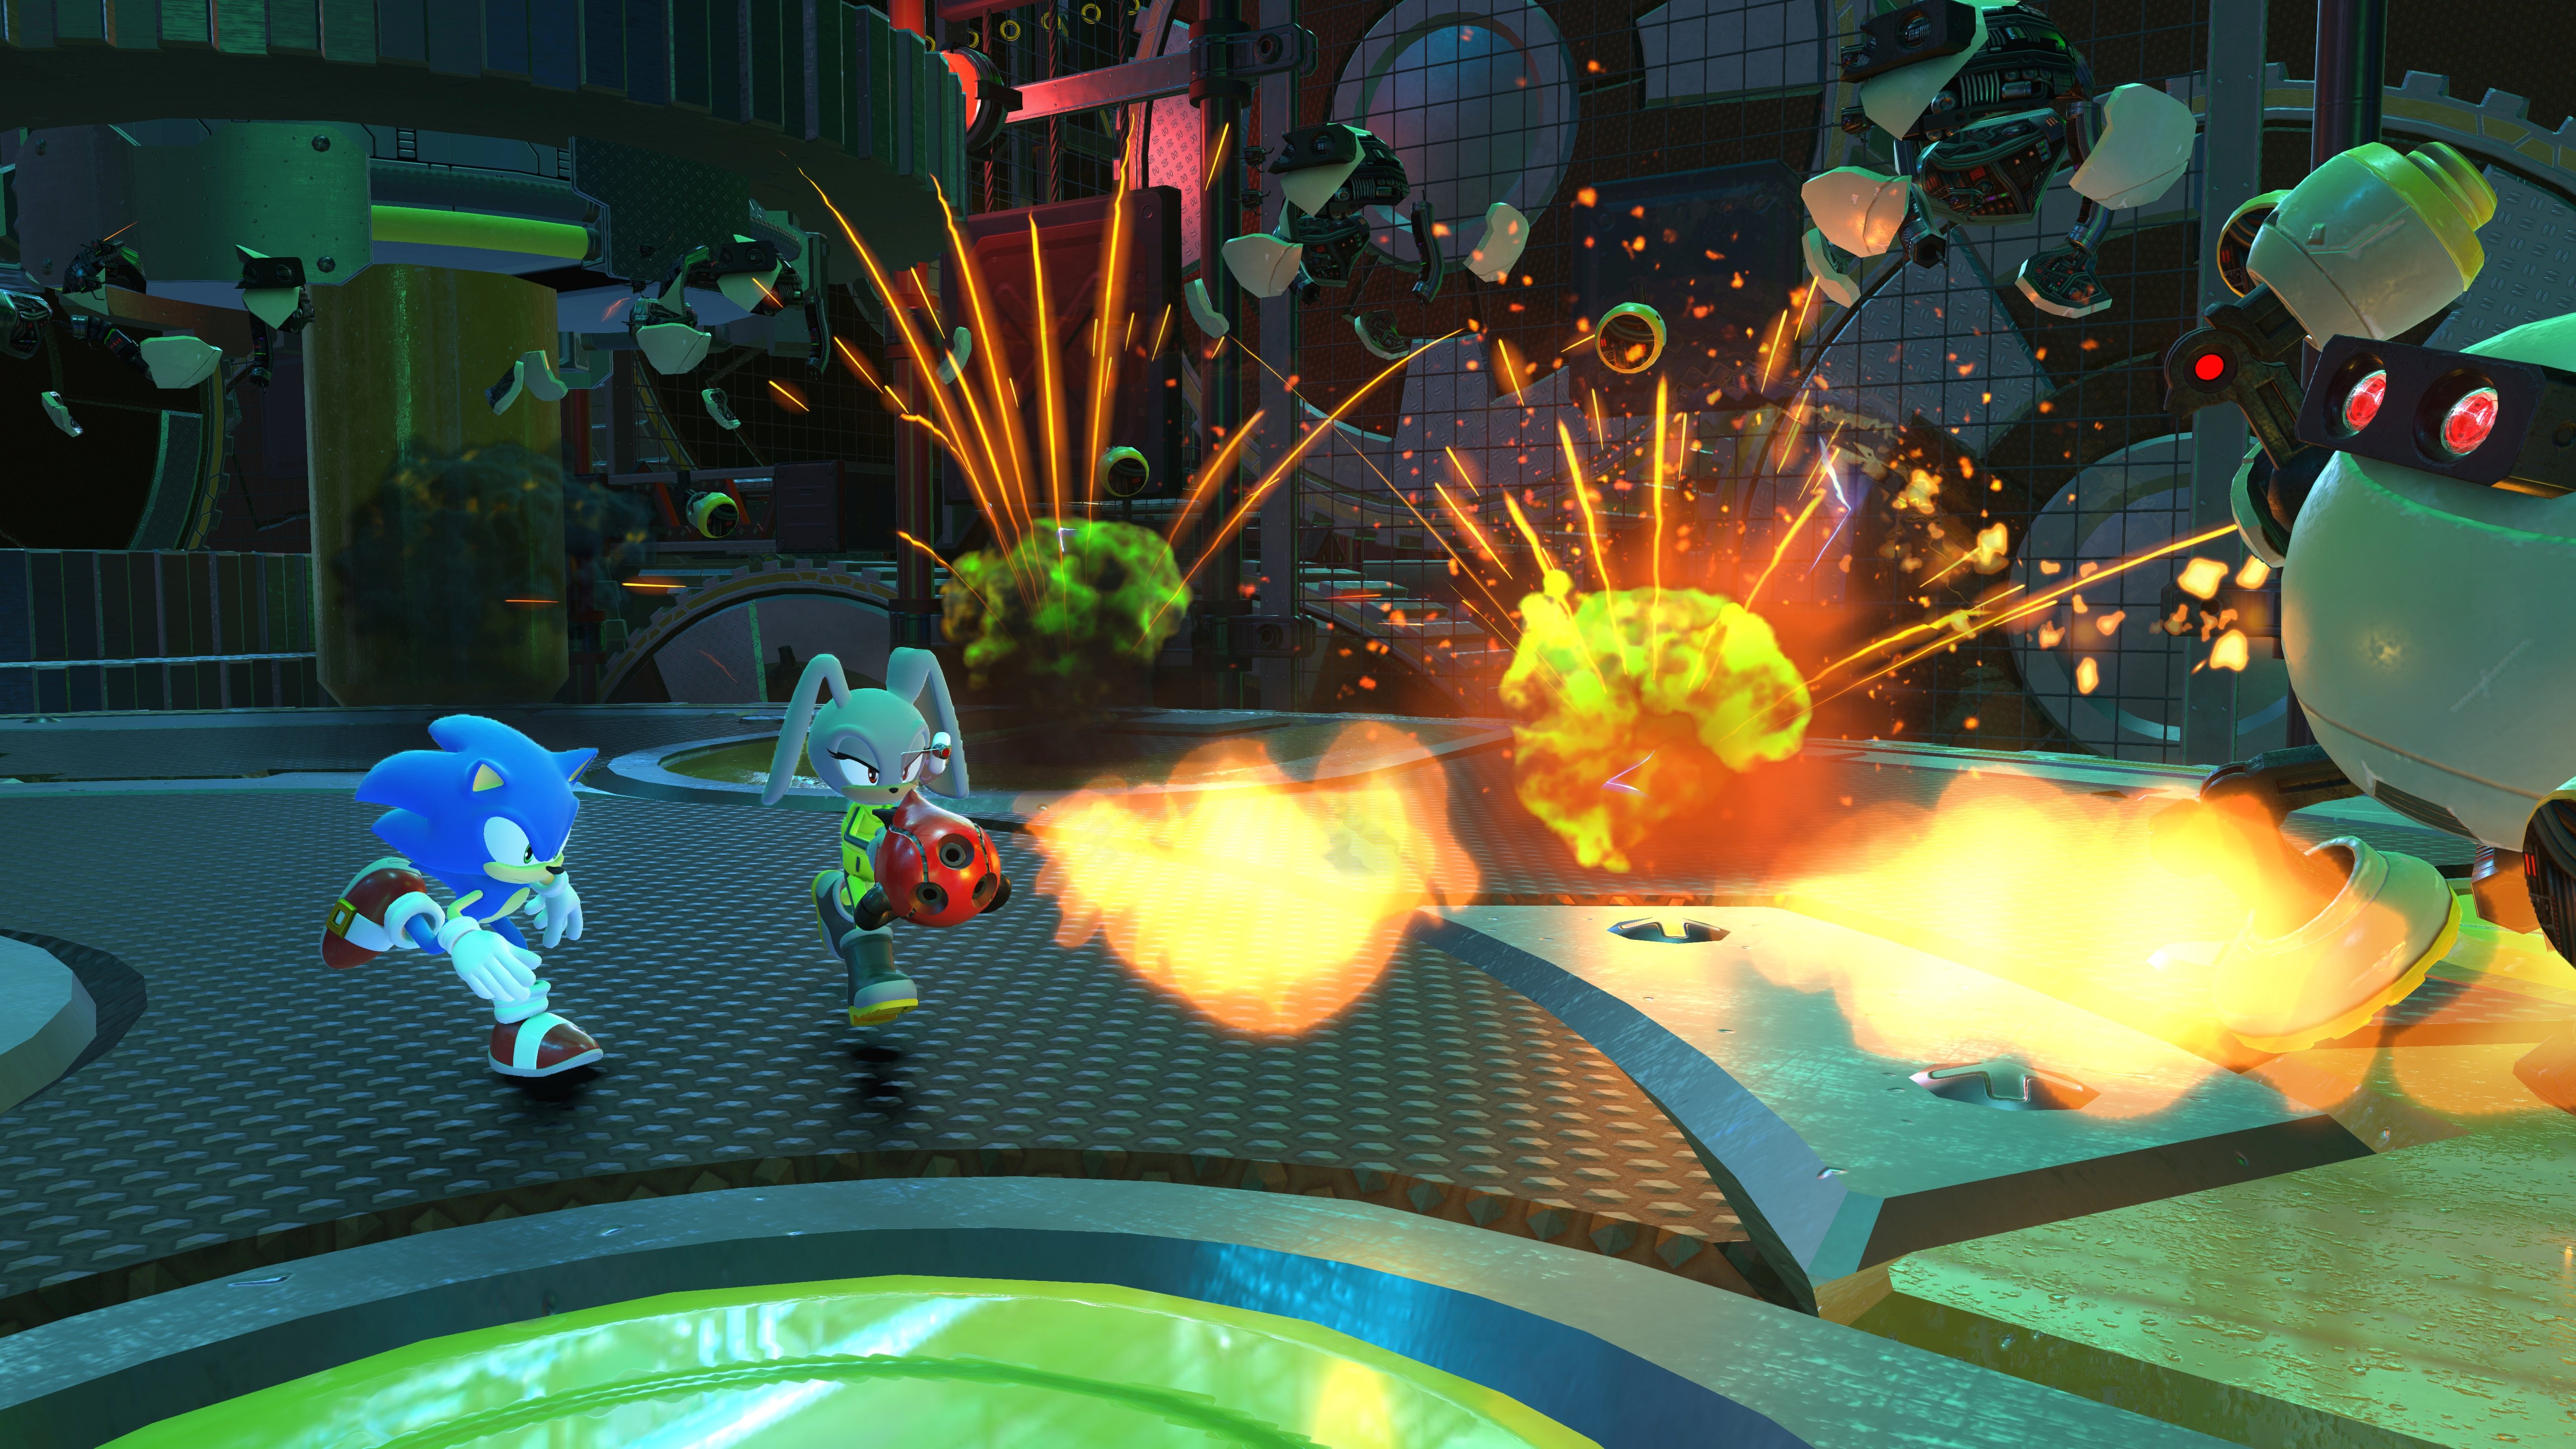 Sonic Forces Gameplay Video Focuses on Free Shadow DLC